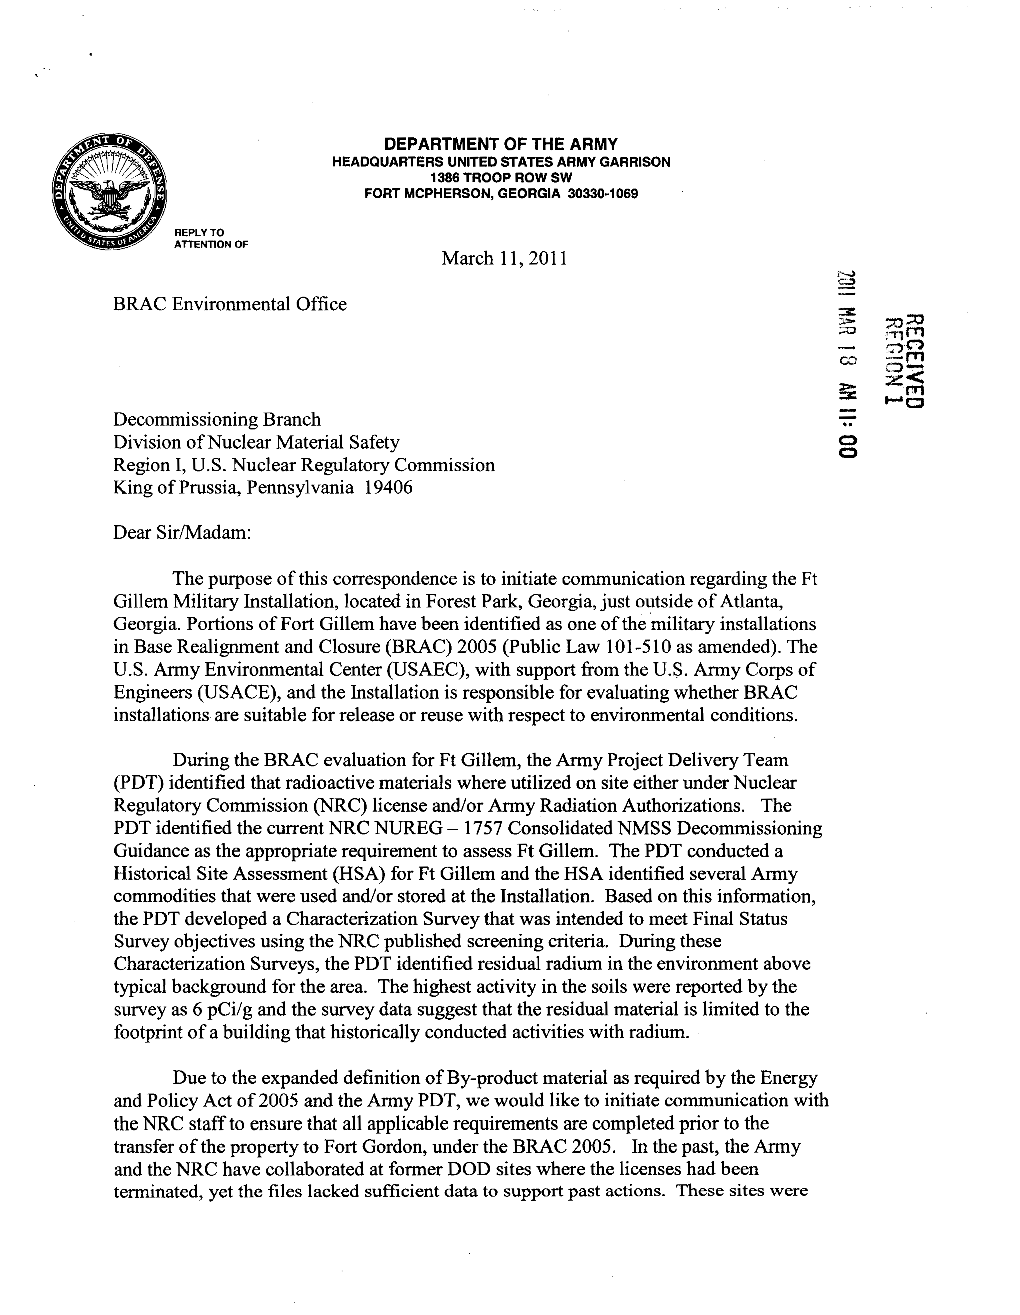 Department of the Army, Ltr Dtd 03/11/2011, RE: FT. Gillem Military Inst., Evaluation Whether BRAC Installations Are Suitable Fo